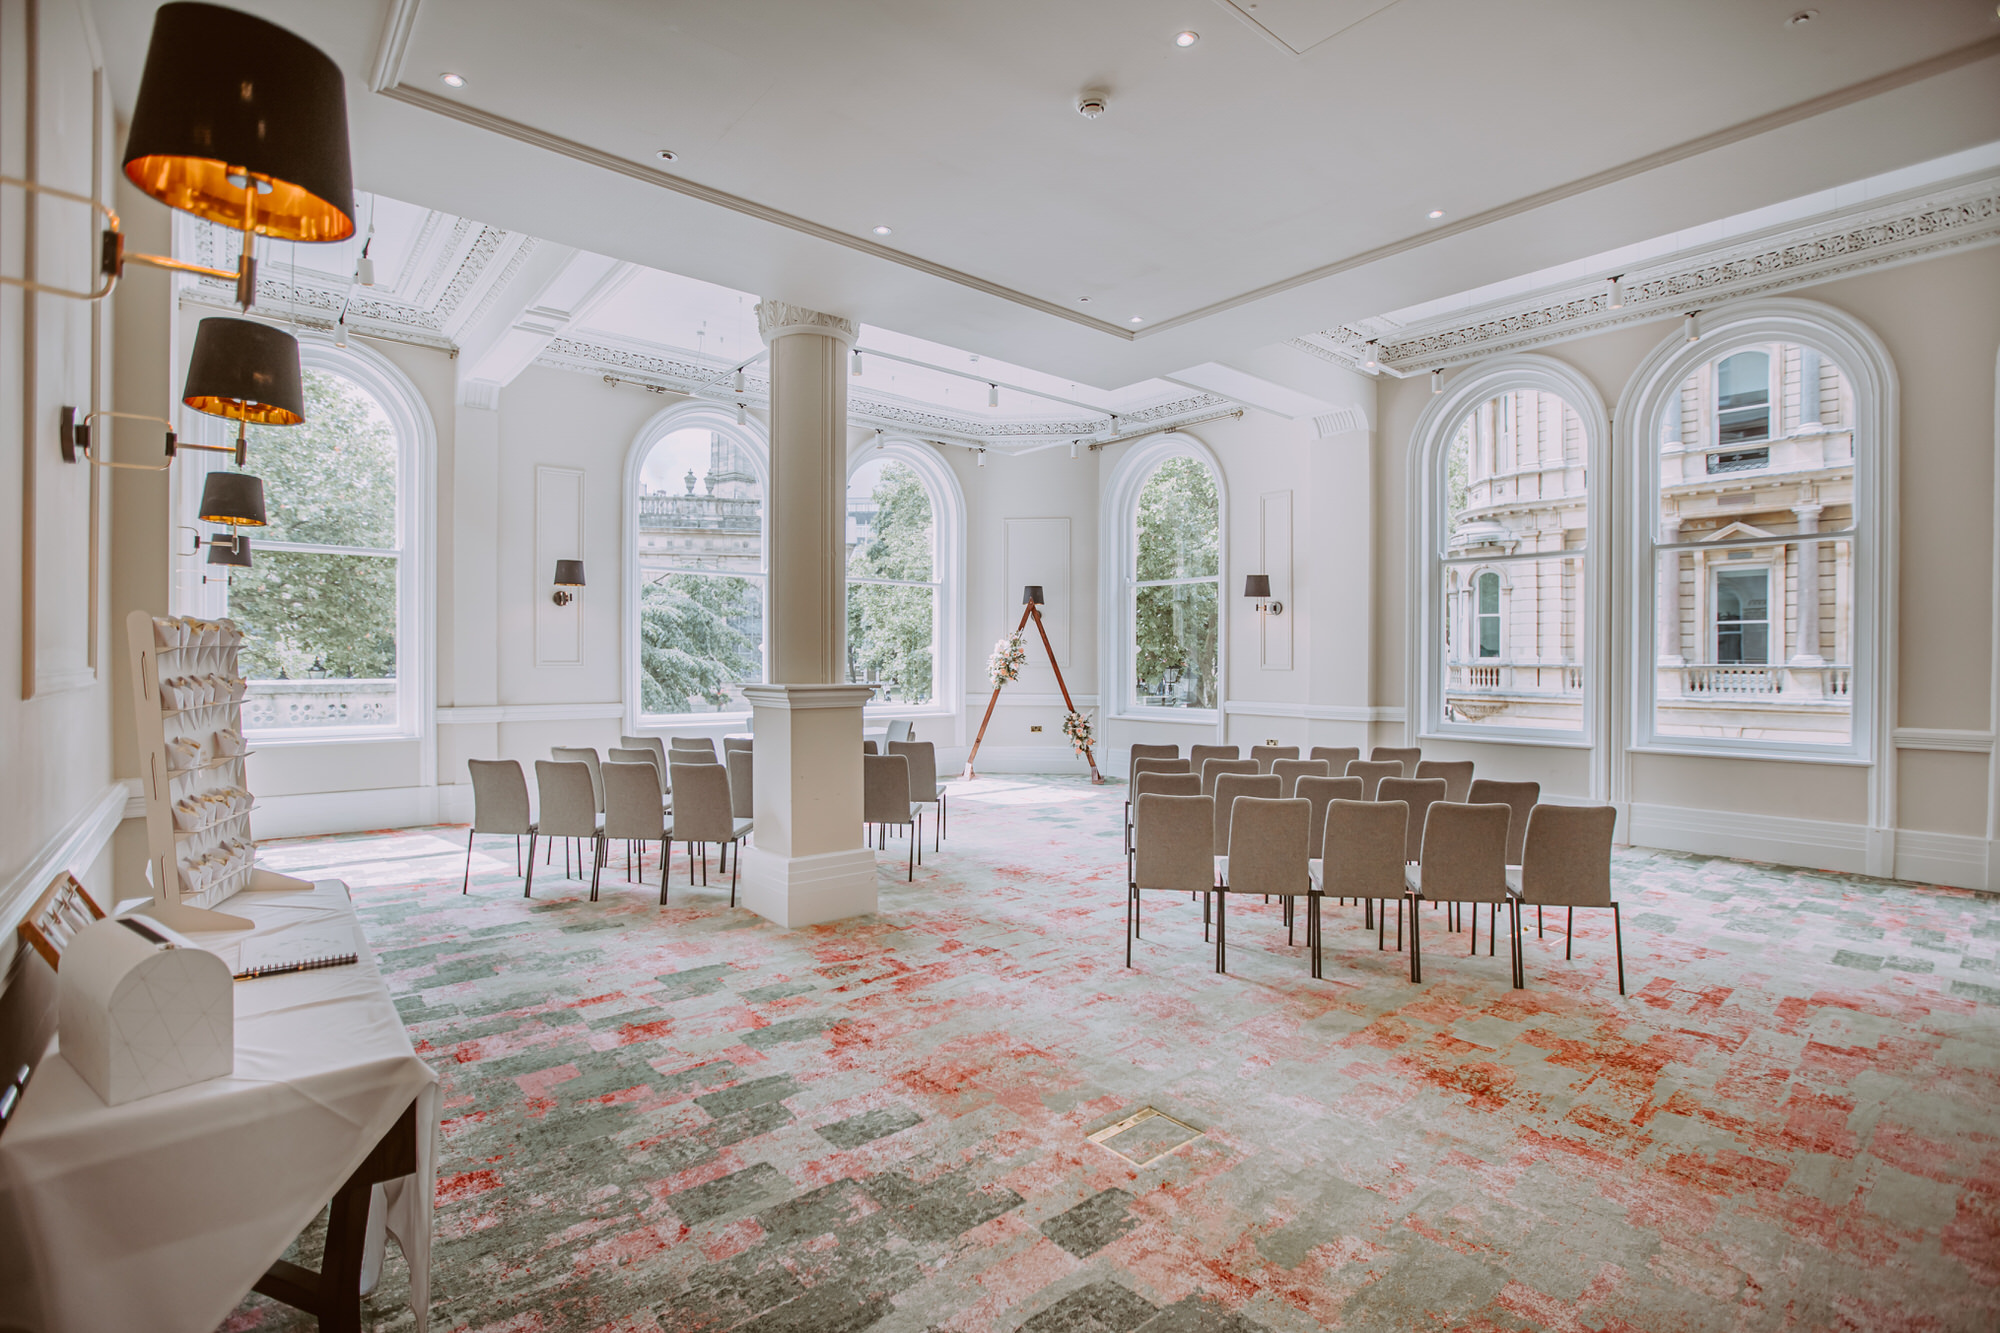 Beautifully decorated ceremony room with large windows at The Grand Hotel Birmingham